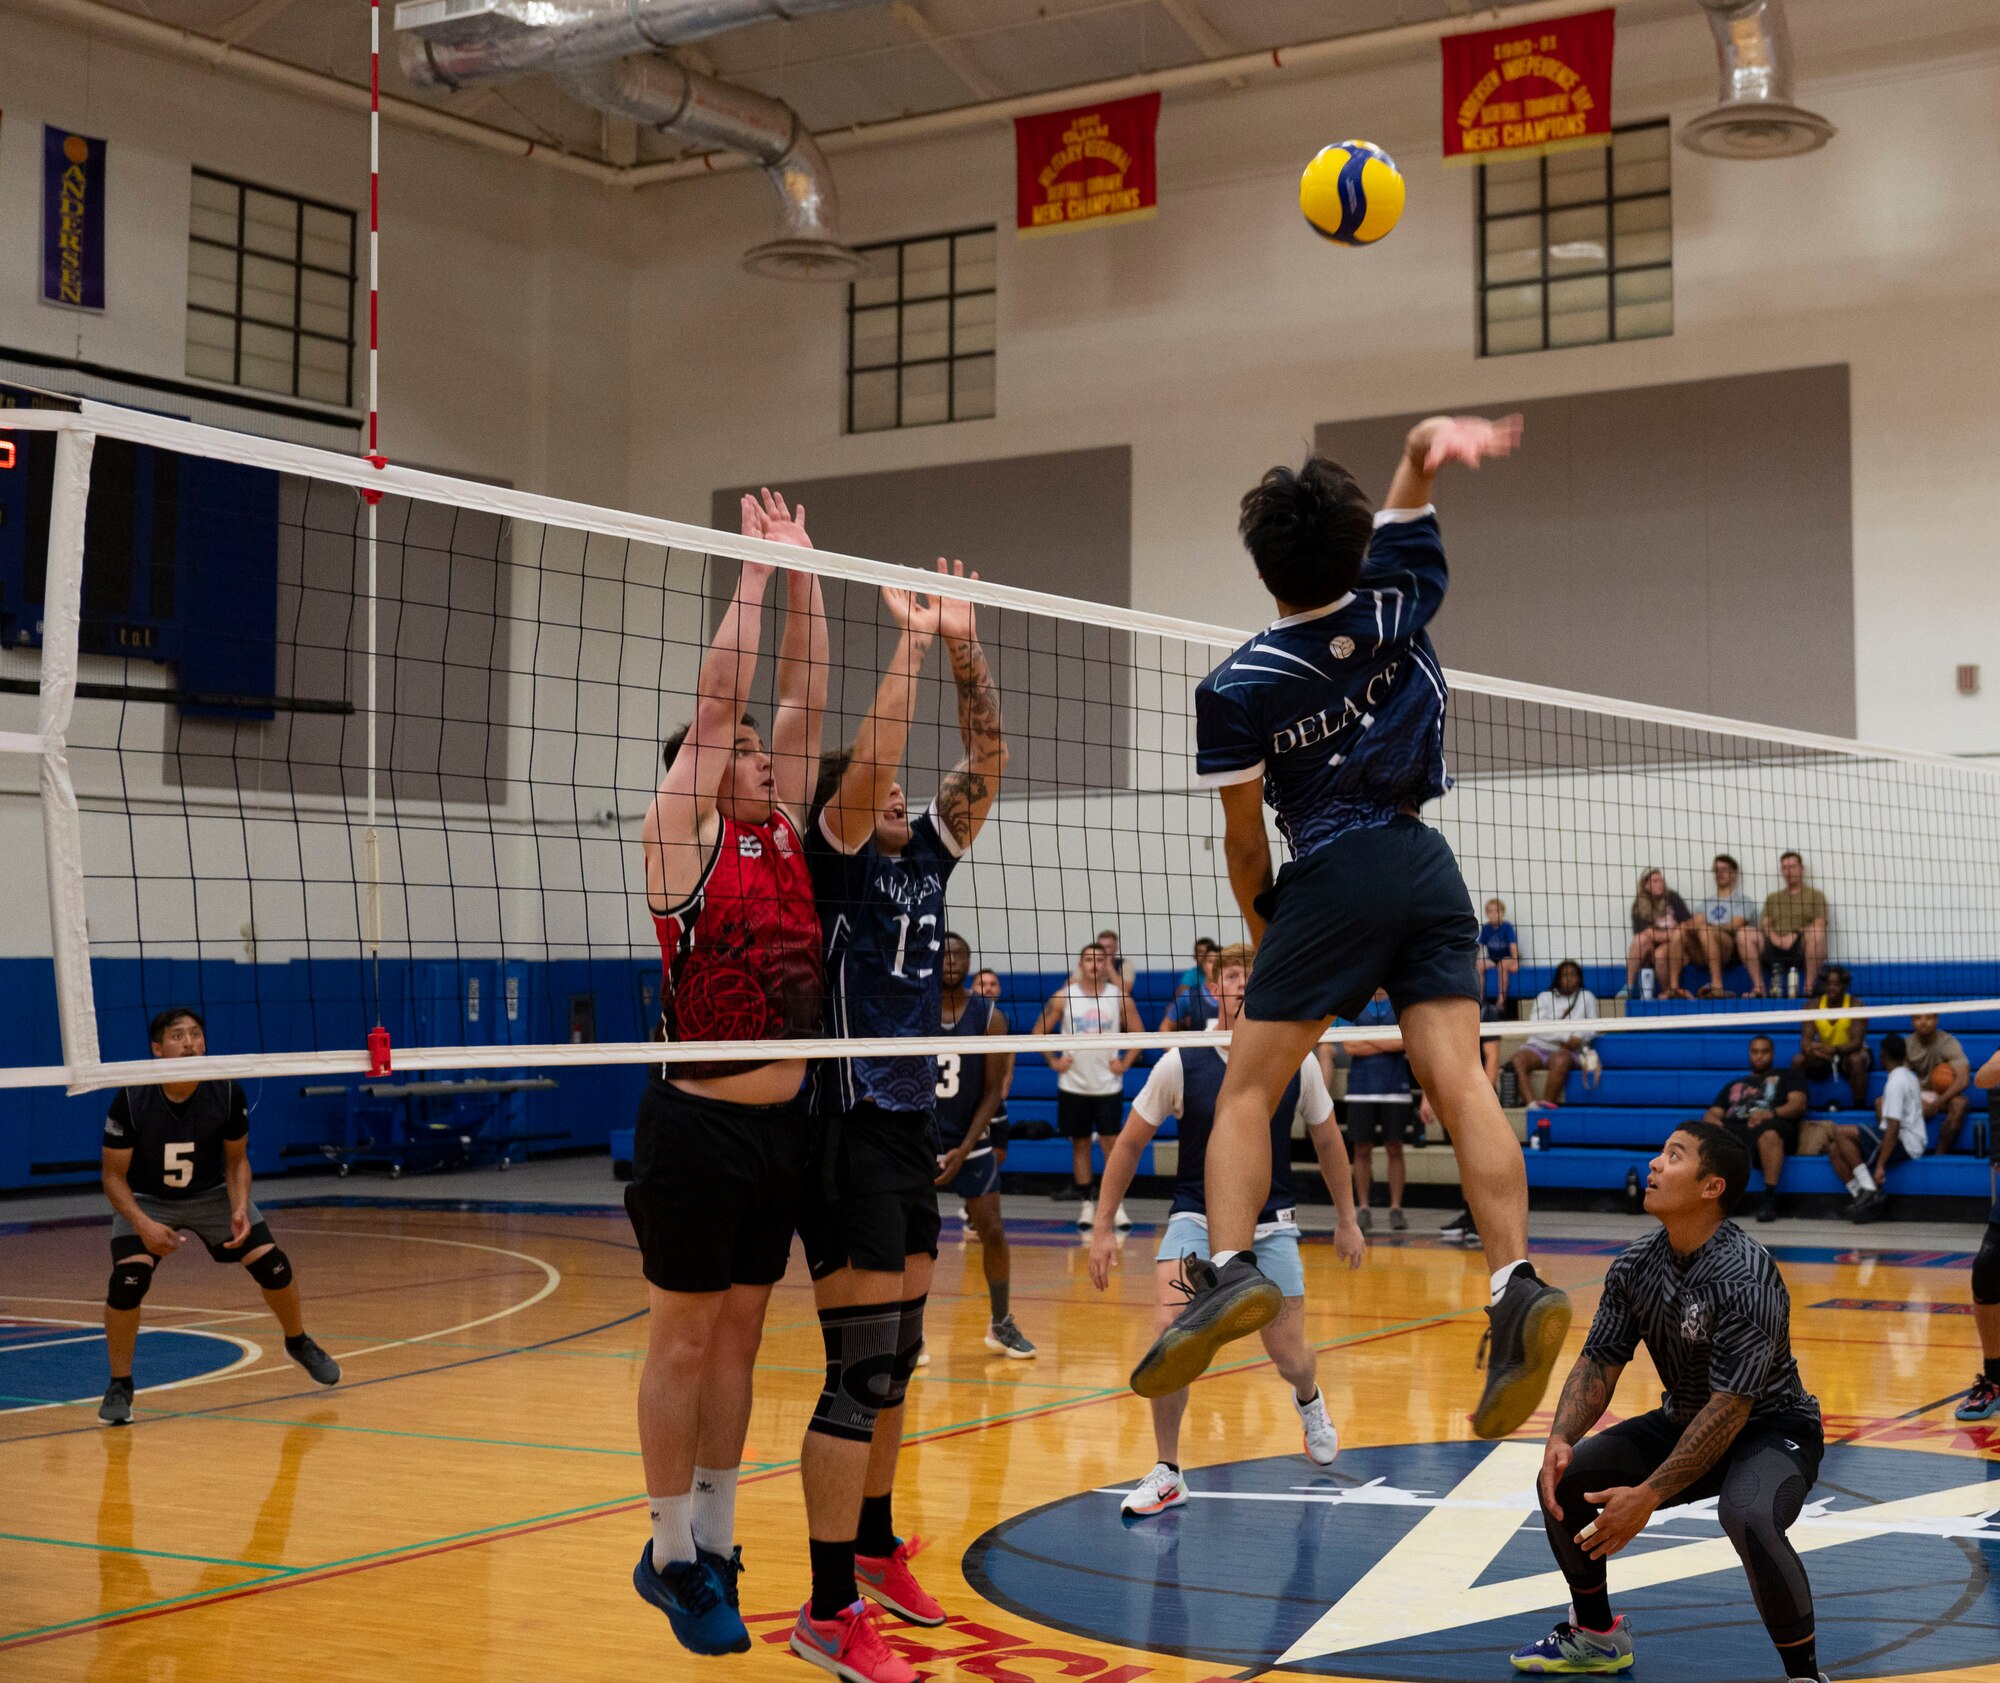 A member of the Security Forces Squadron’s intramural volleyball team jumps to spike the ball during the championship game on Andersen Air Force Base, Guam, Oct. 26, 2023.  Andersen’s intramural volleyball league ended in a climactic final game between the Security Forces Squadron and CES. The game ended with SFS being named the champions. (U.S. Air Force photo by Airman 1st Class Spencer Perkins)